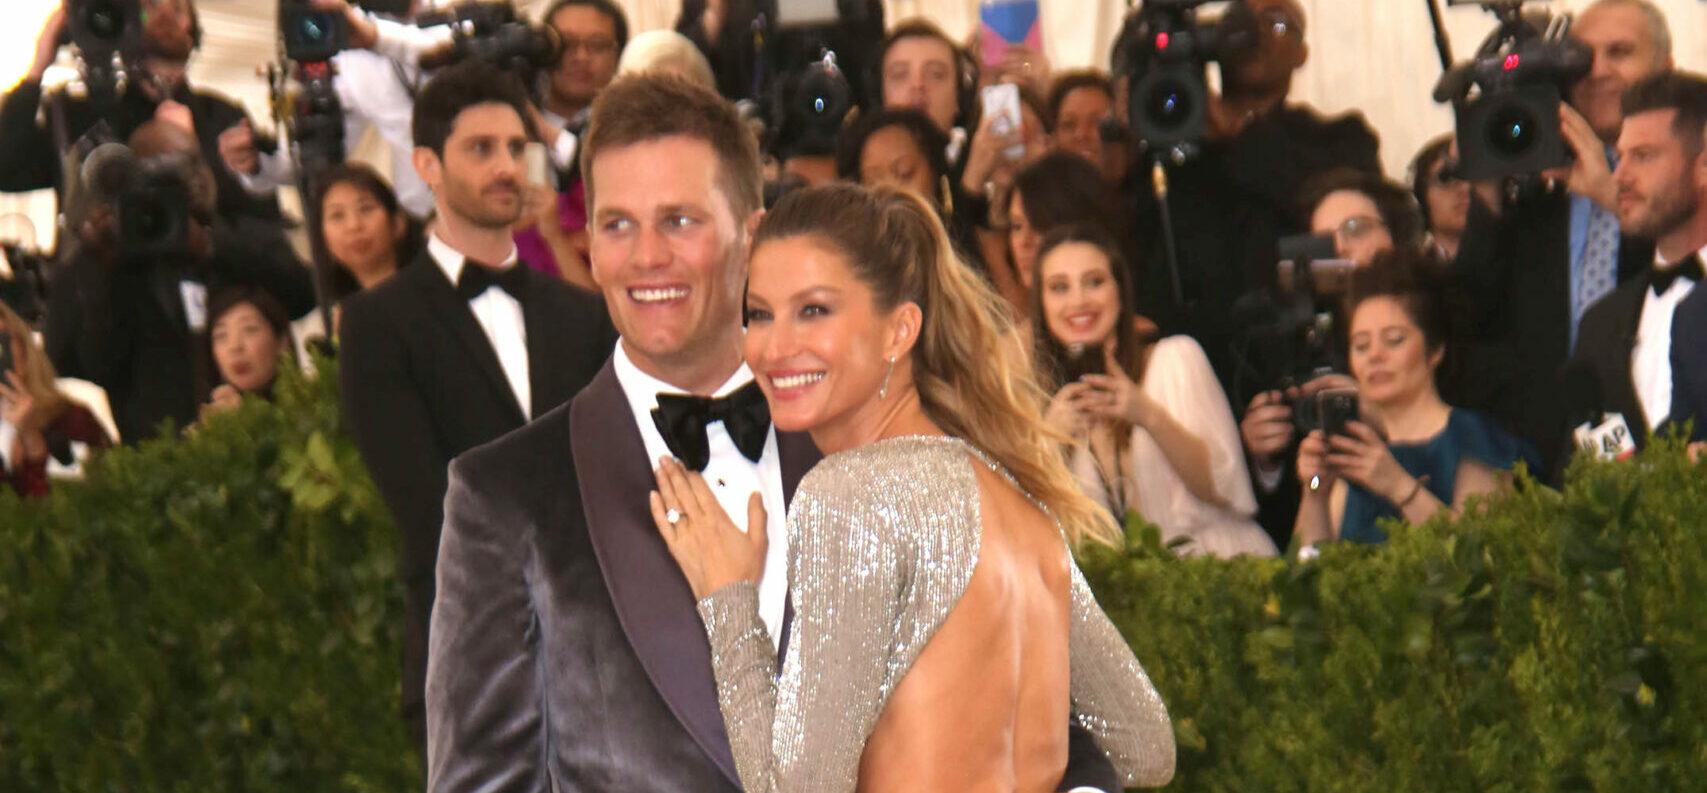 Tom Brady Releases Statement After Filing For Divorce From Gisele Bündchen!